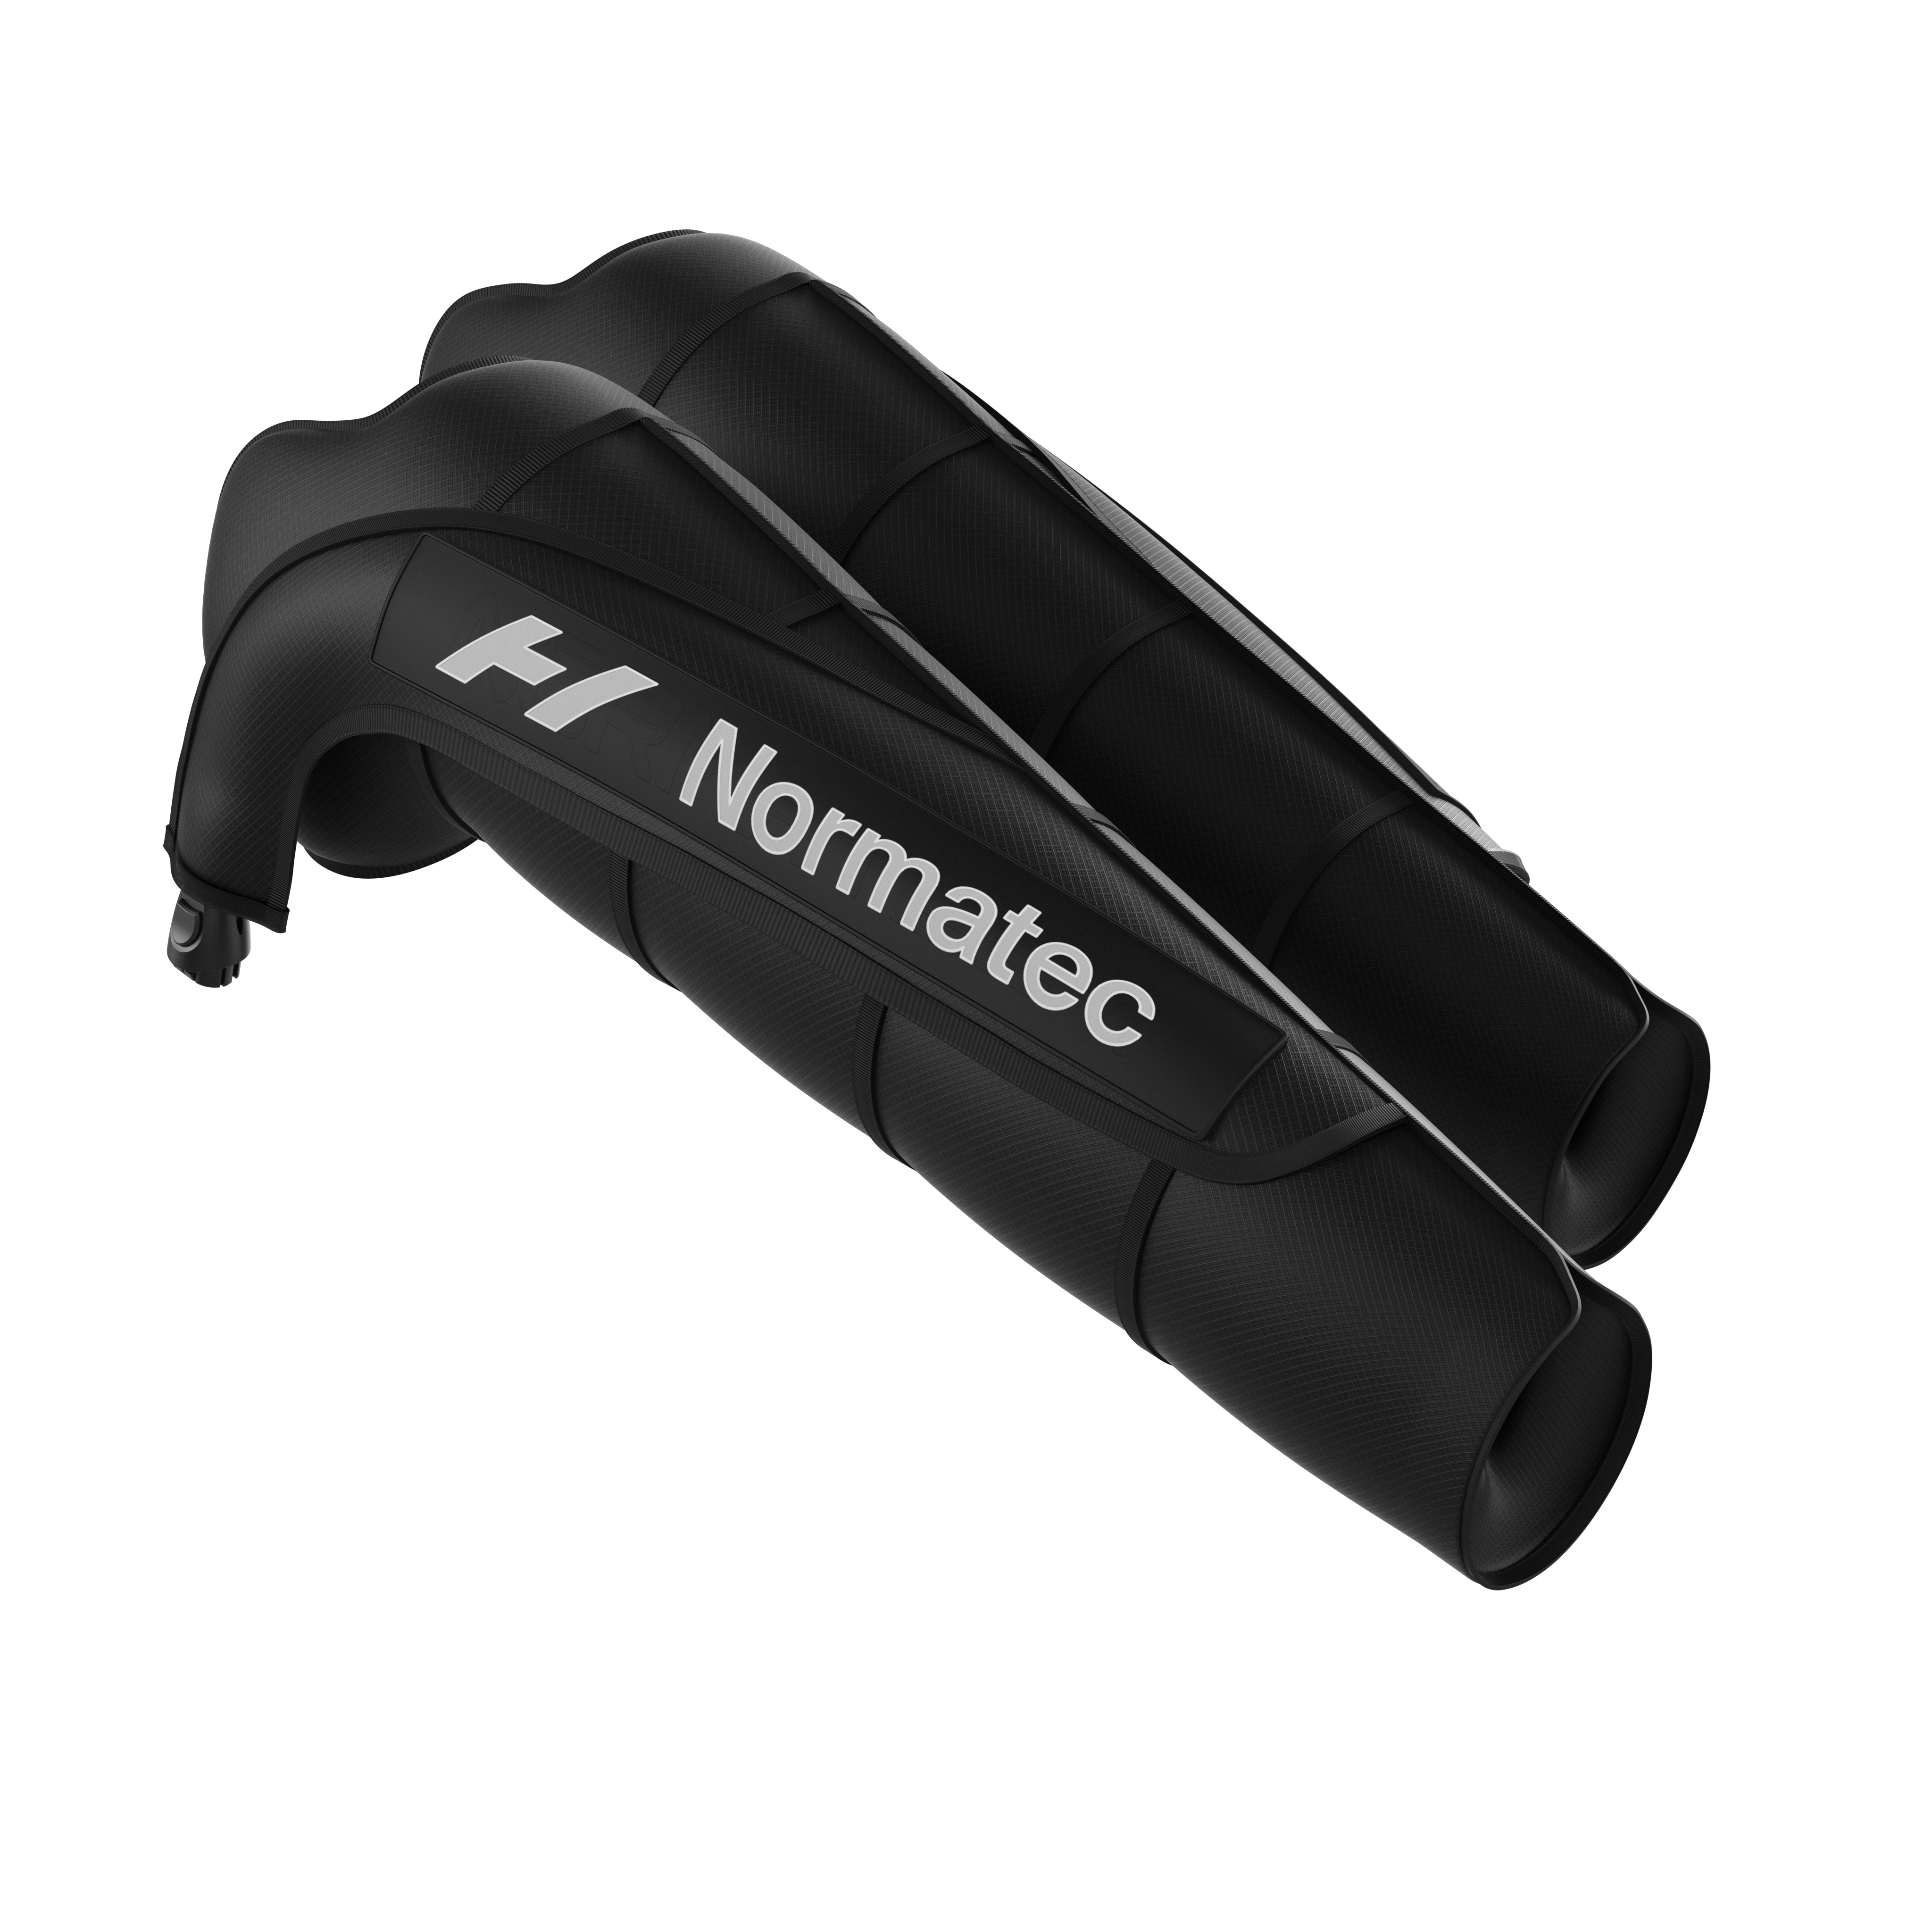 NormaTec 3 Leg Recovery System - Armset (Zubehör)